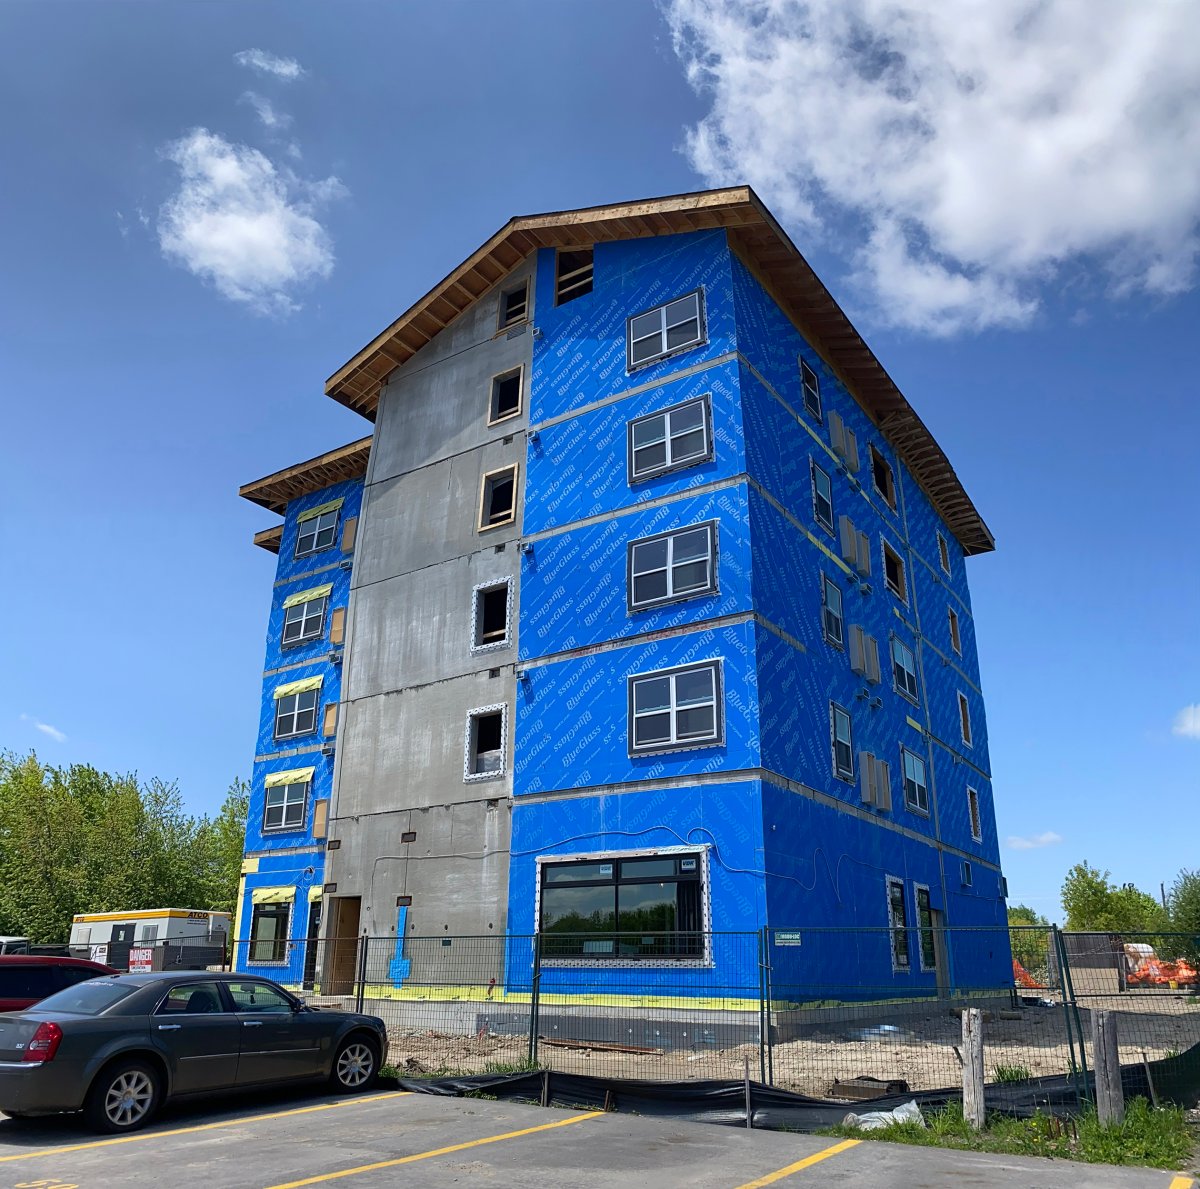 Kindle Communities Apartments, one of three supportive housing projects under construction in Guelph, Ont.